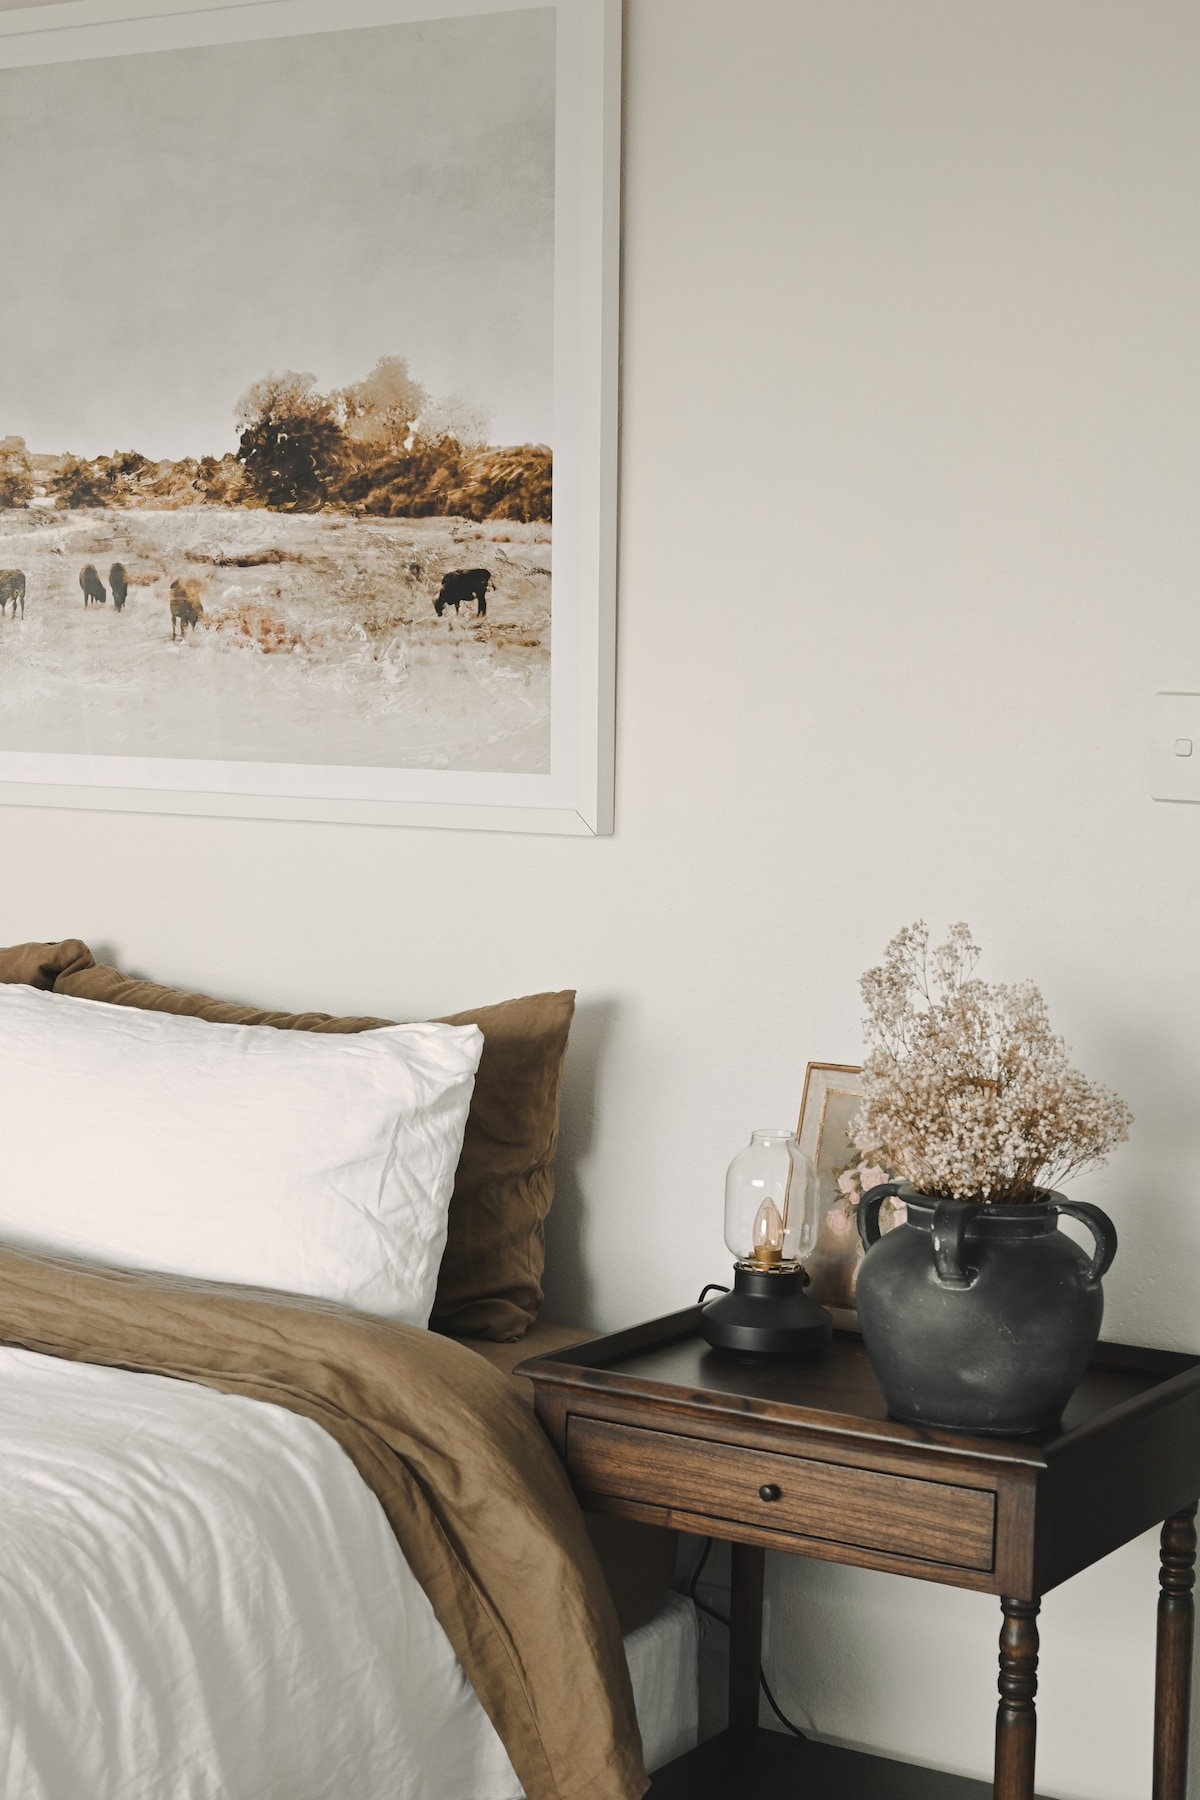 The Cattleman 's Cottage - Luxury Farm Stay